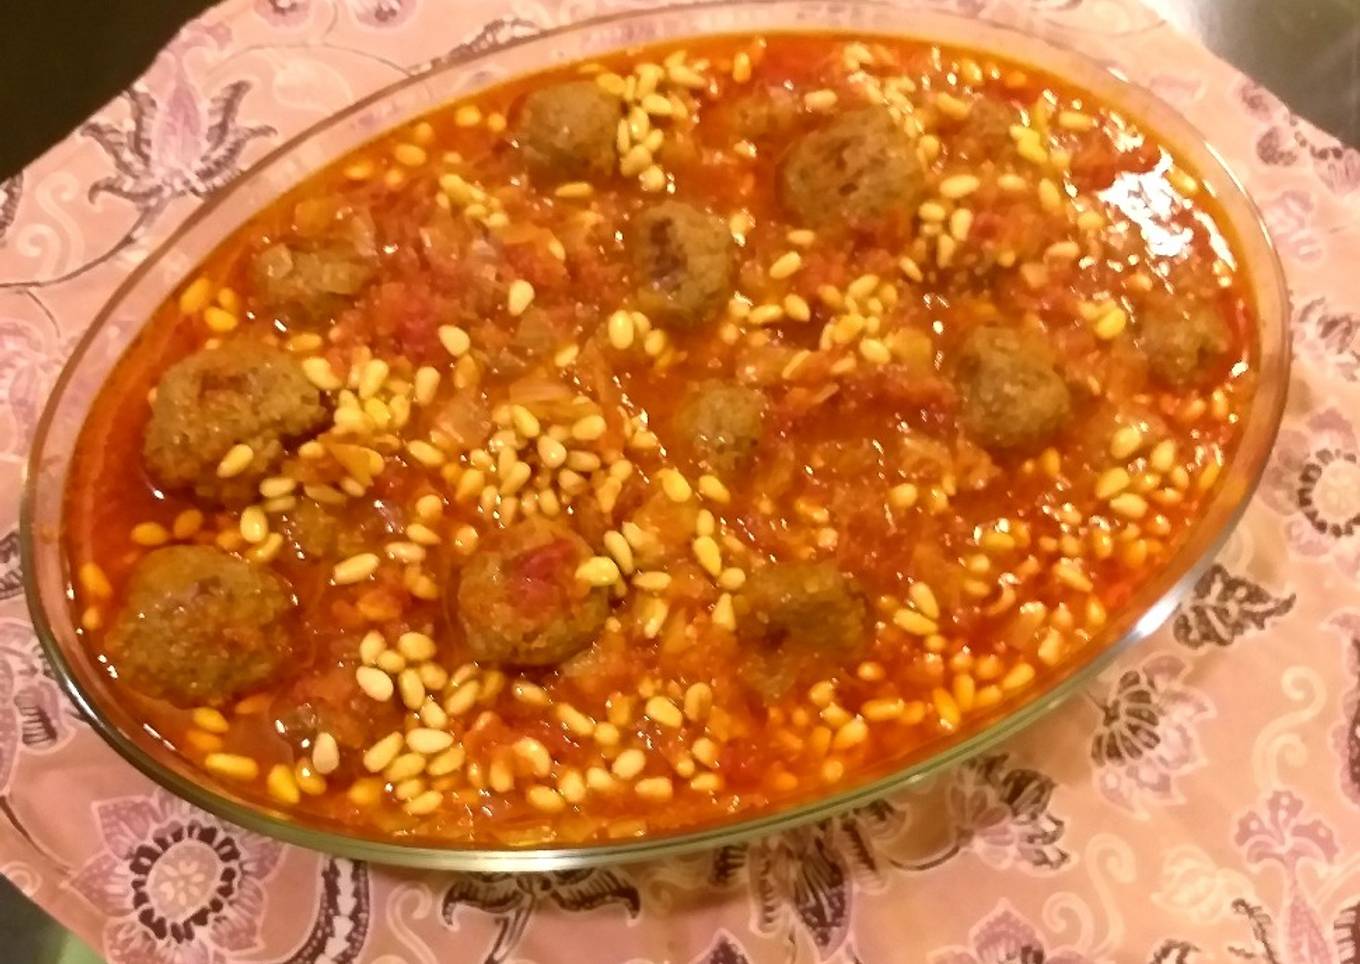 Meatballs and pine nuts in tomato sauce